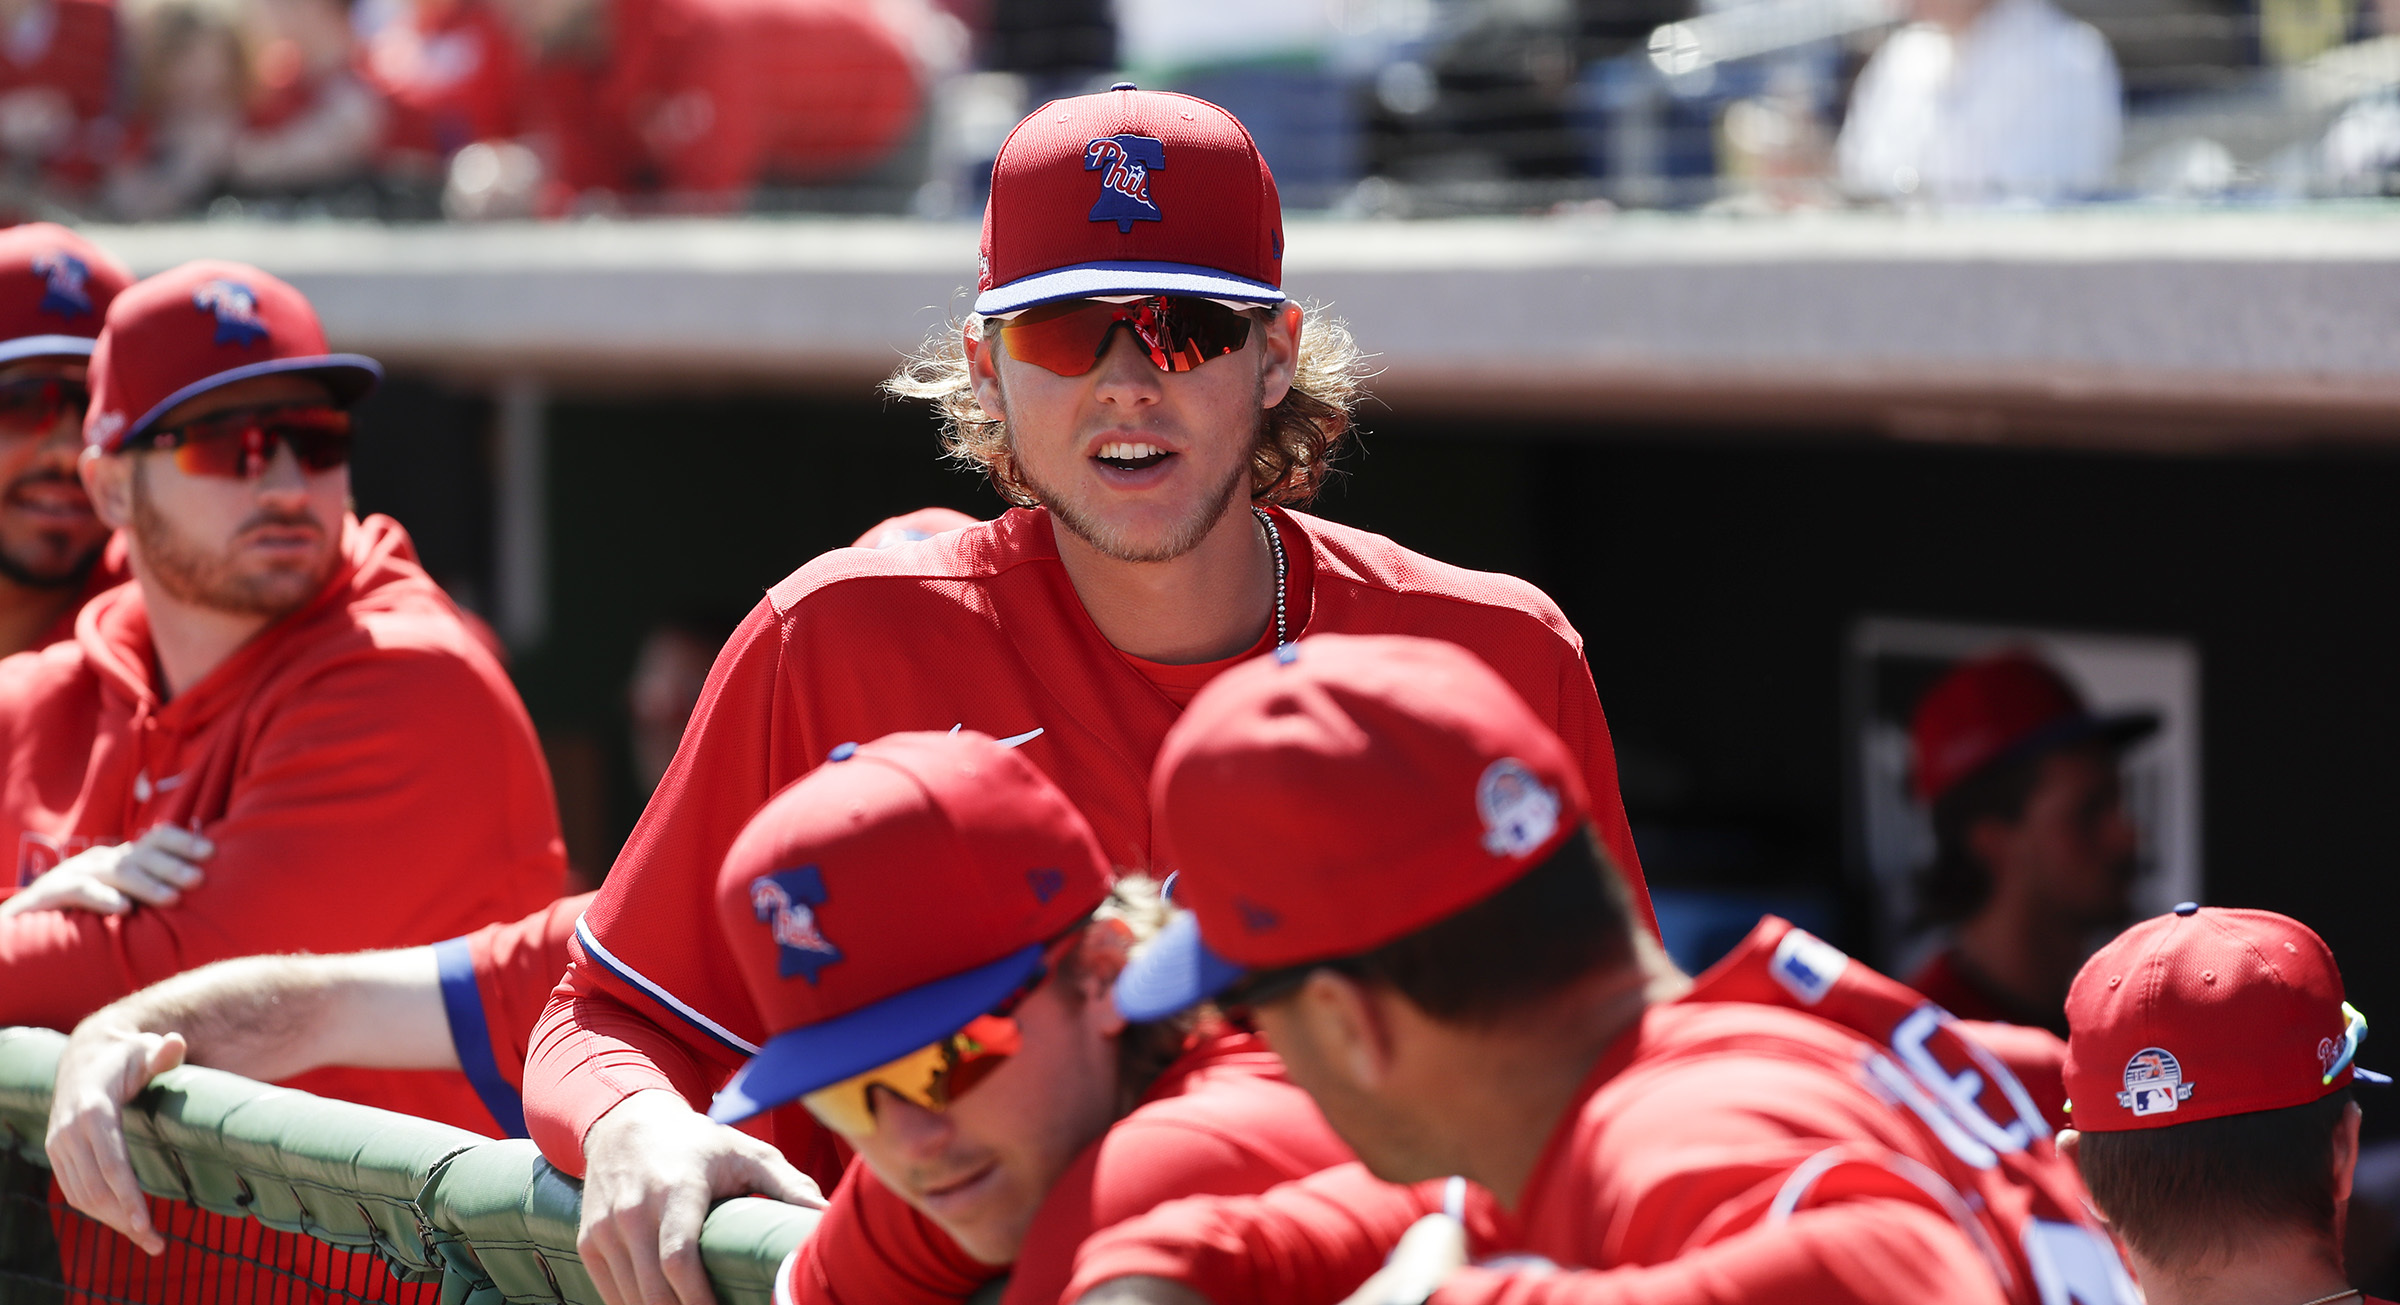 Bohm is a hit in his Phillies' debut – Delco Times